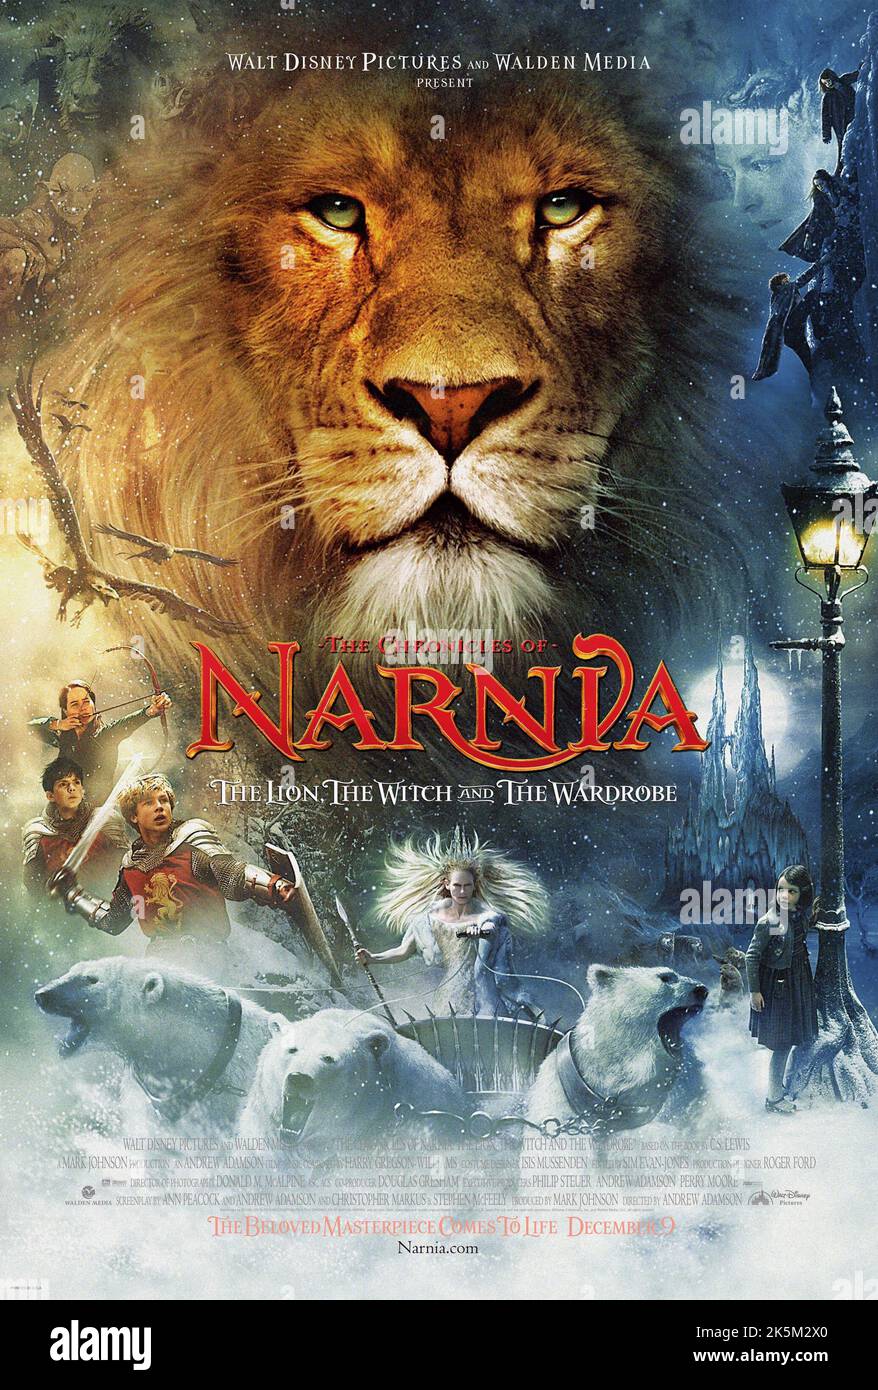 The Chronicles Of Narnia The Lion, The Witch And The Wardrobe 2005 The Lion, The Witch And The Wardrobe Stock Photo